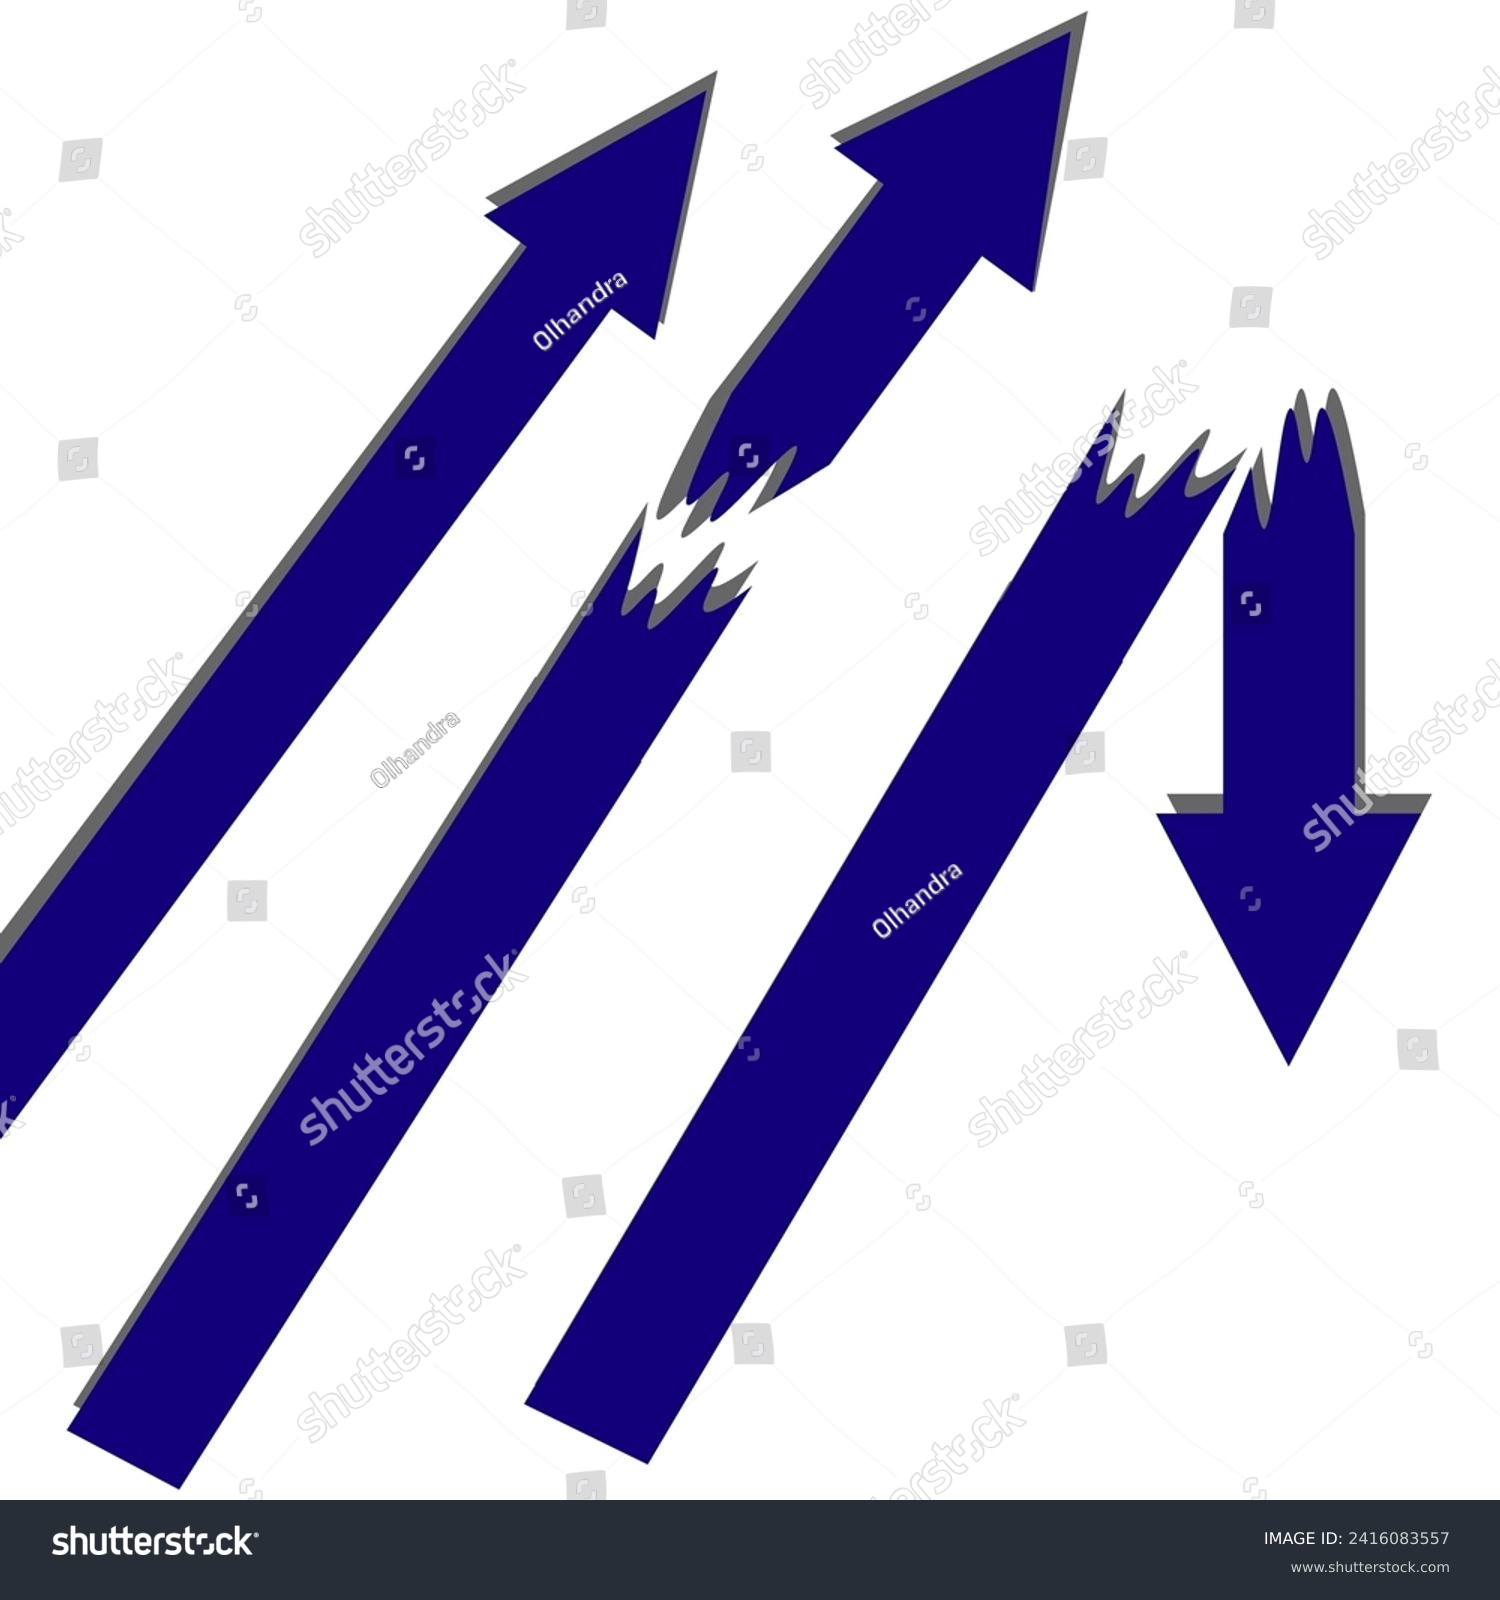 SVG of Vector graphics. On a white background, a blue arrow rises sharply, the second one is broken, the third one is broken and falls down. svg